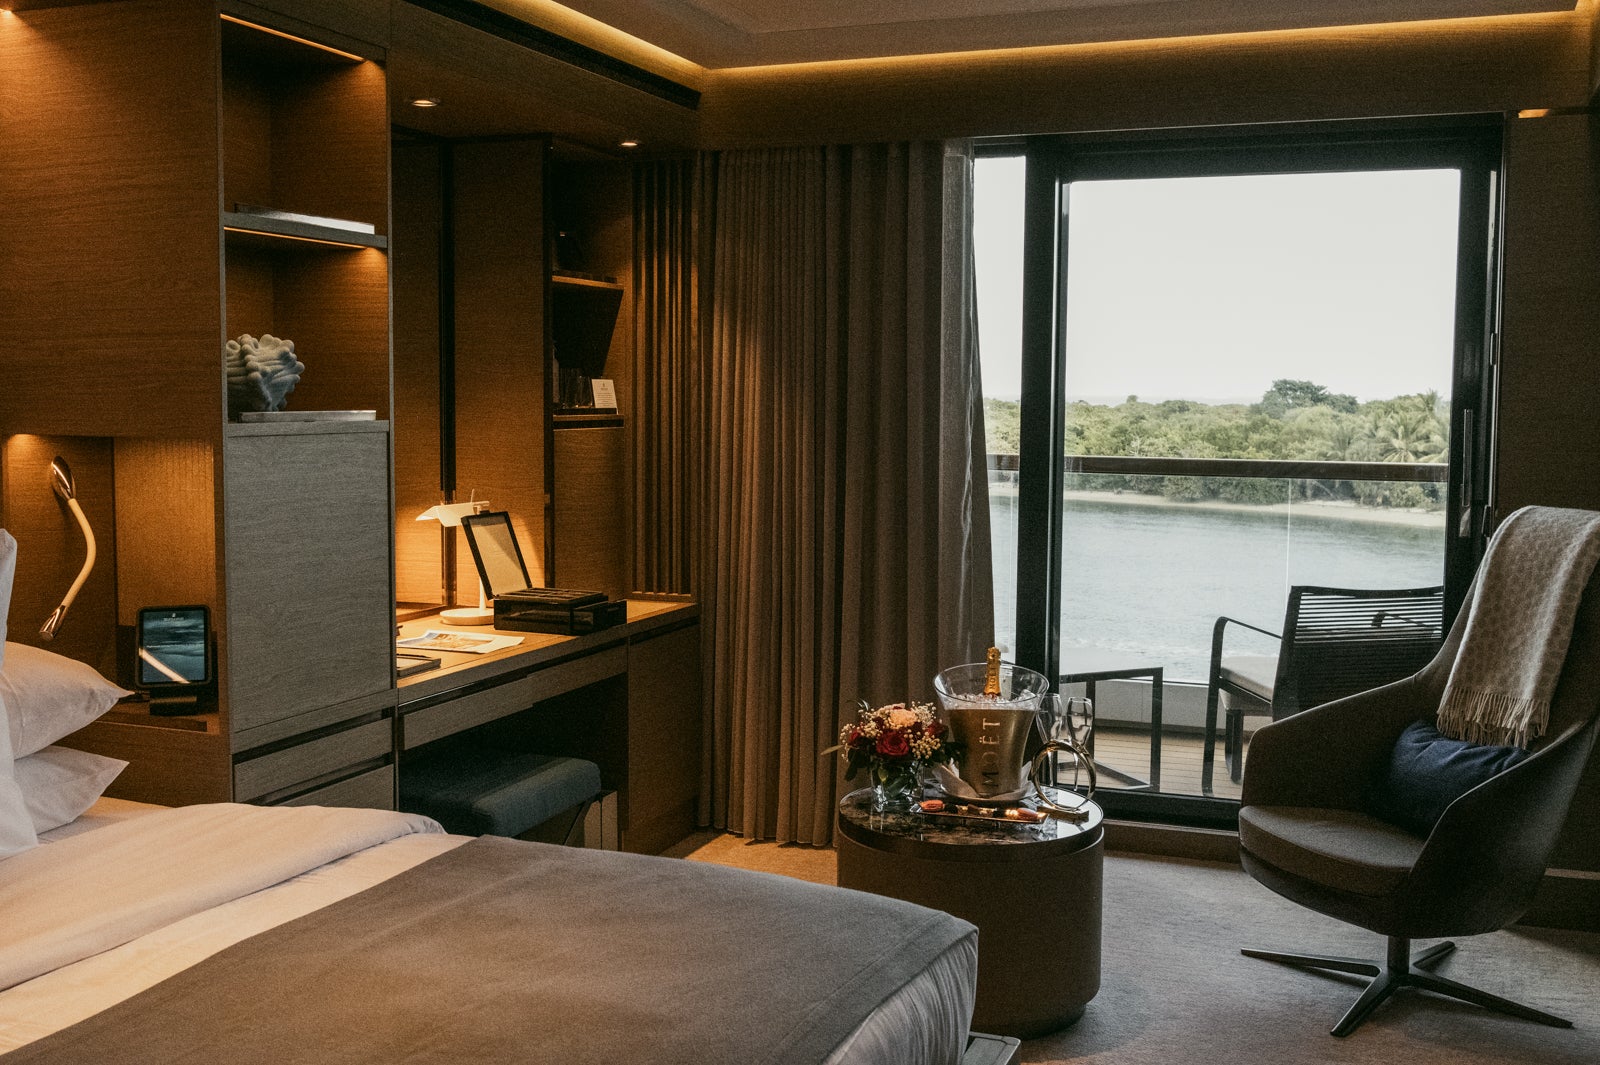 I love luxury hotels, and The Ritz-Carlton Yacht was made for people like me